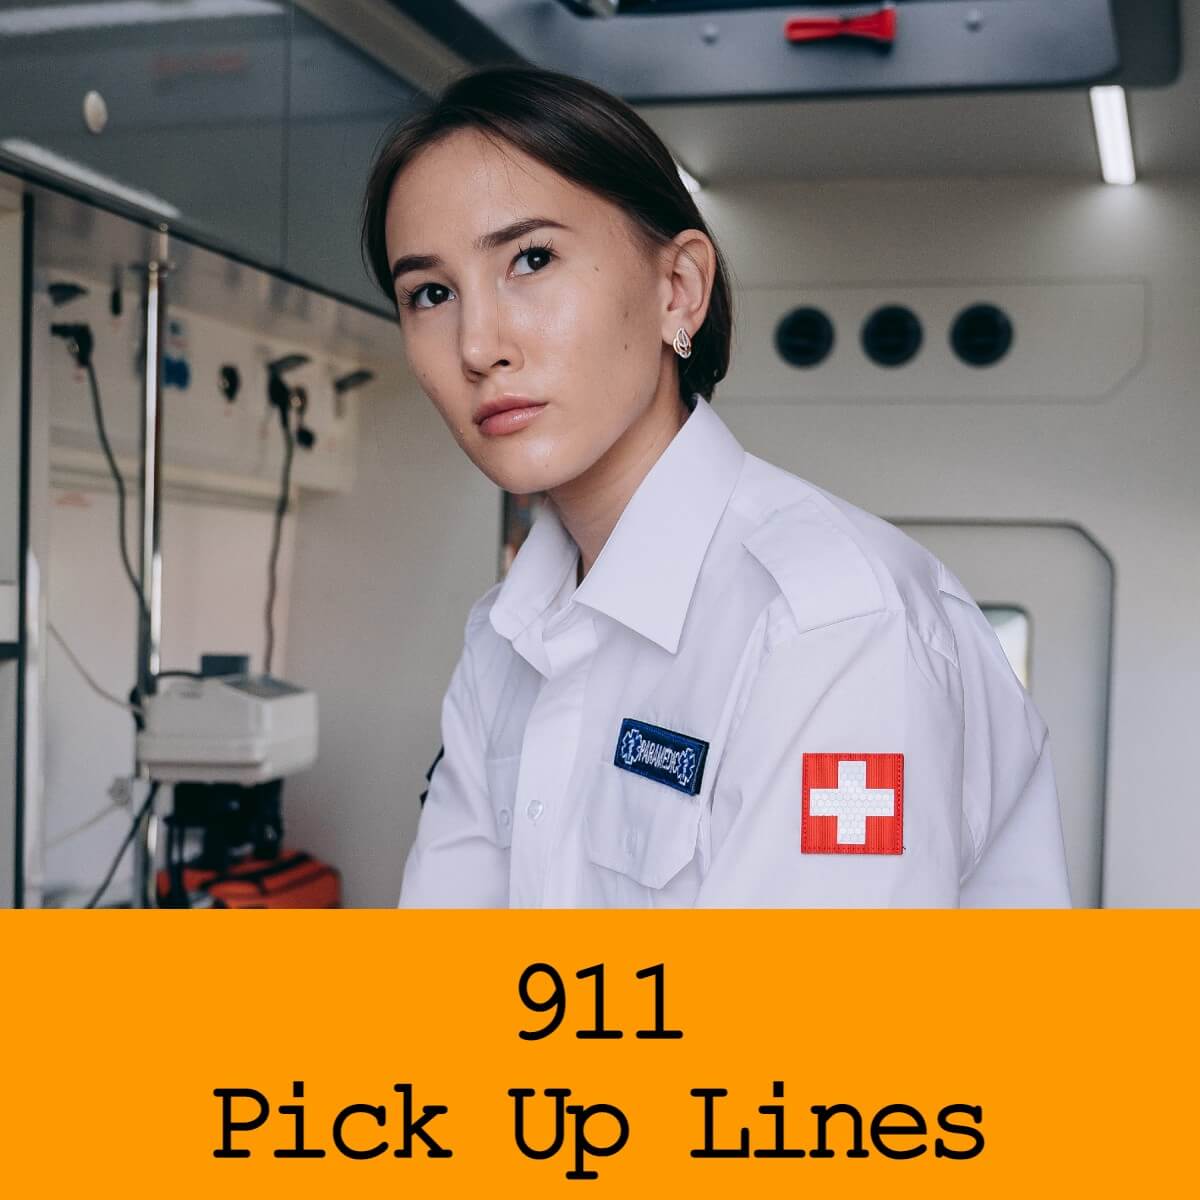 Pick Up Lines About 911 Emergency Dispatcher